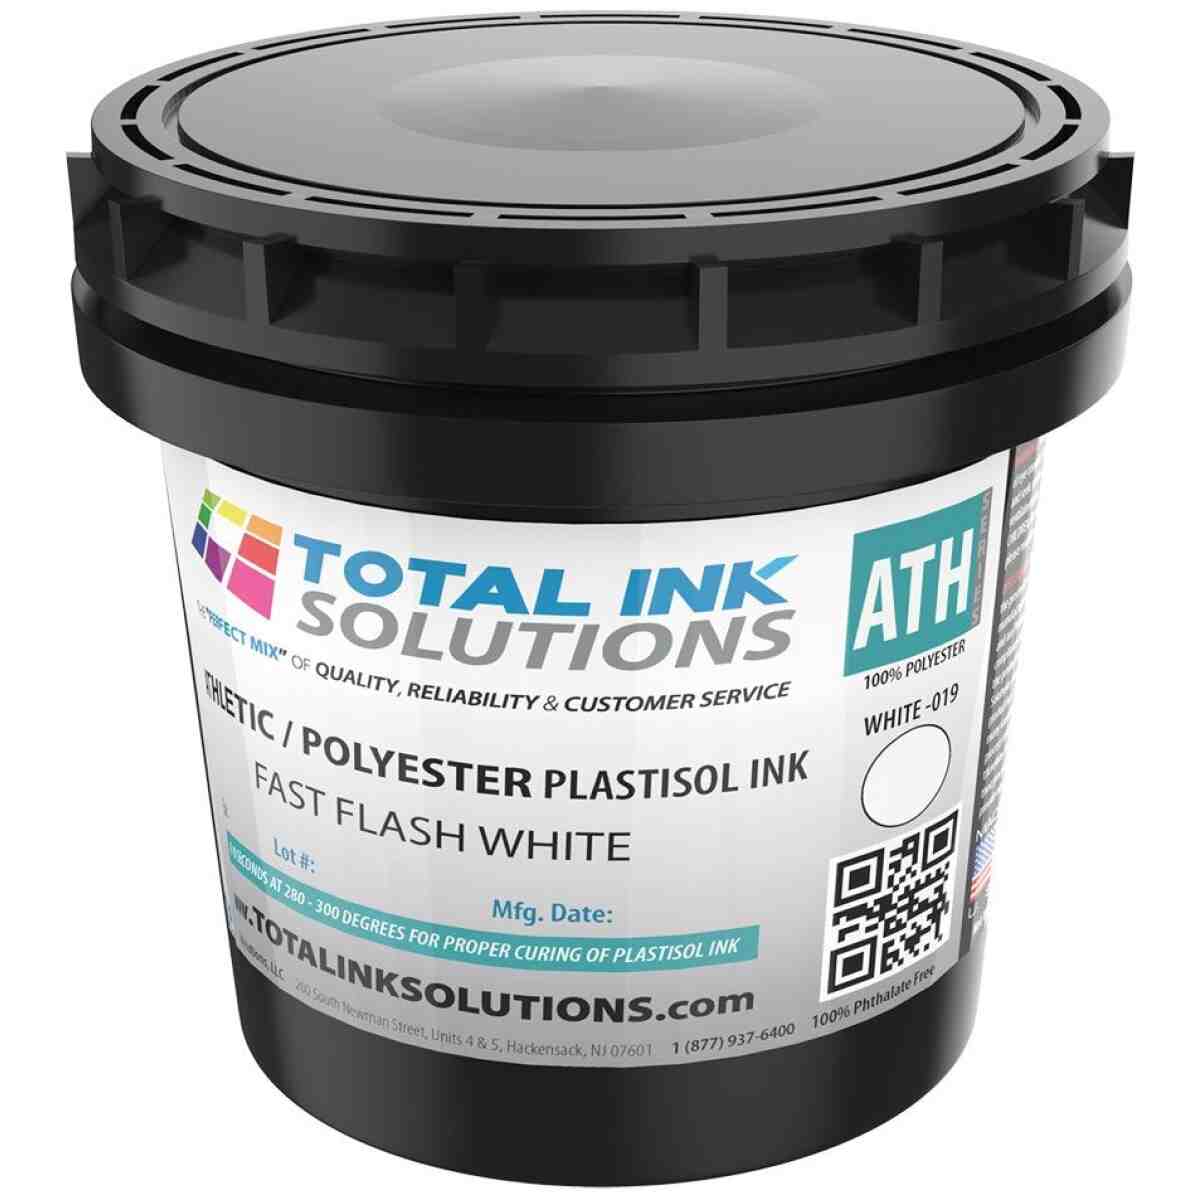 Fast Flash Athletic 100% Polyester Plastisol Ink - White - Quart TOTAL INK SOLUTIONS®